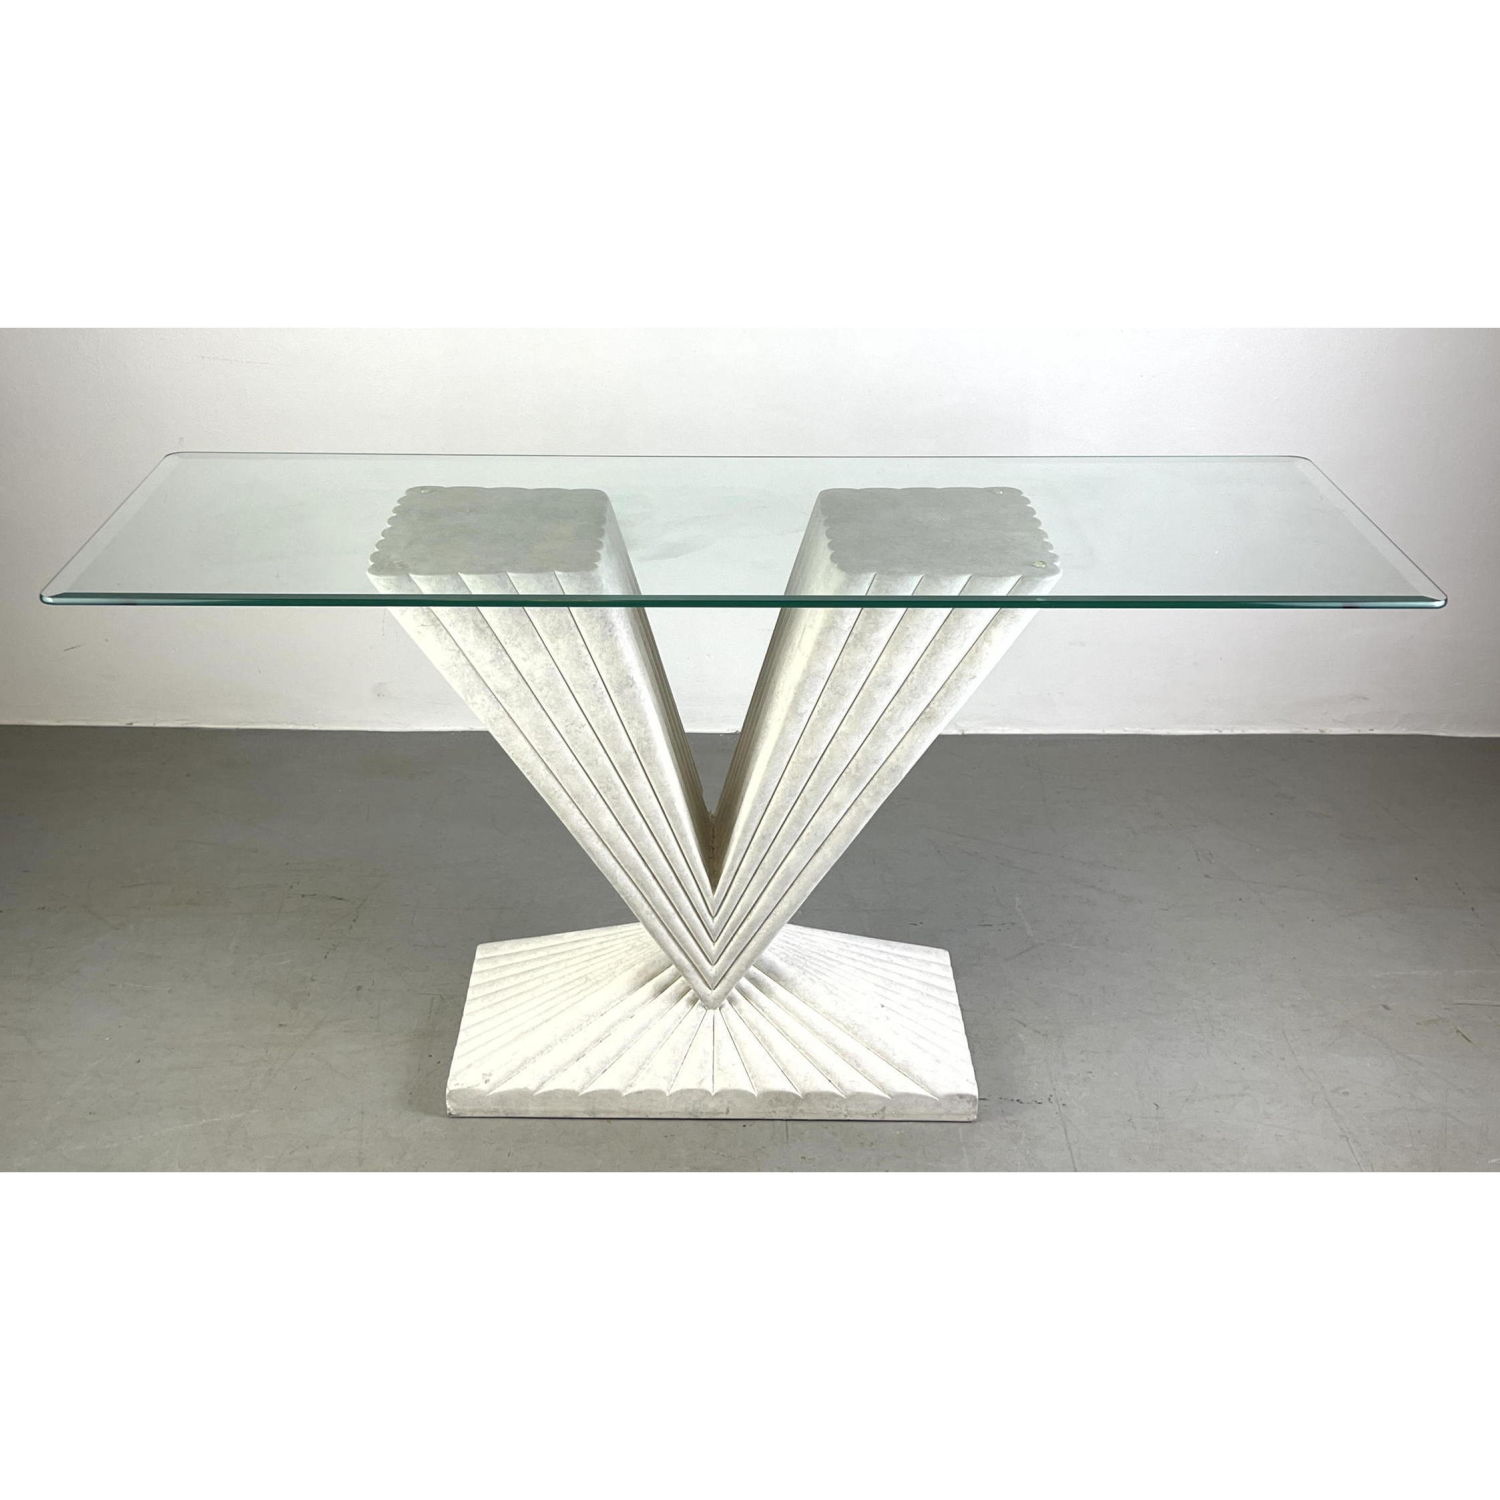 ART DECO Inspired Glass Top Console 2b9320